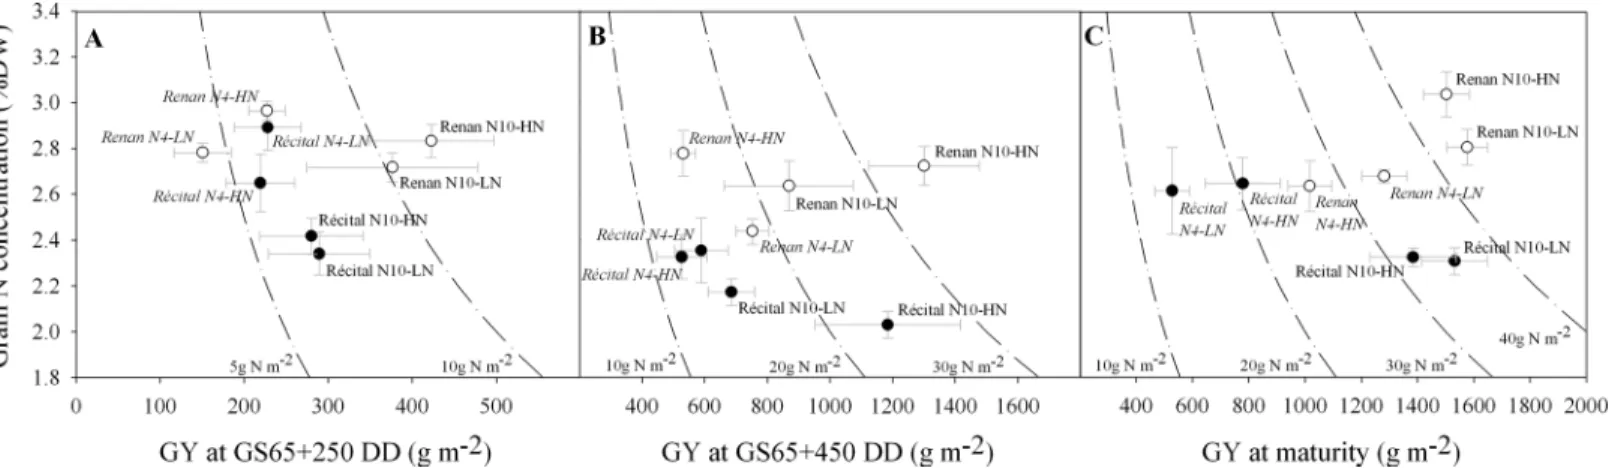 Fig 1. Relations between grain yield and grain N concentration at three post-flowering developmental stages